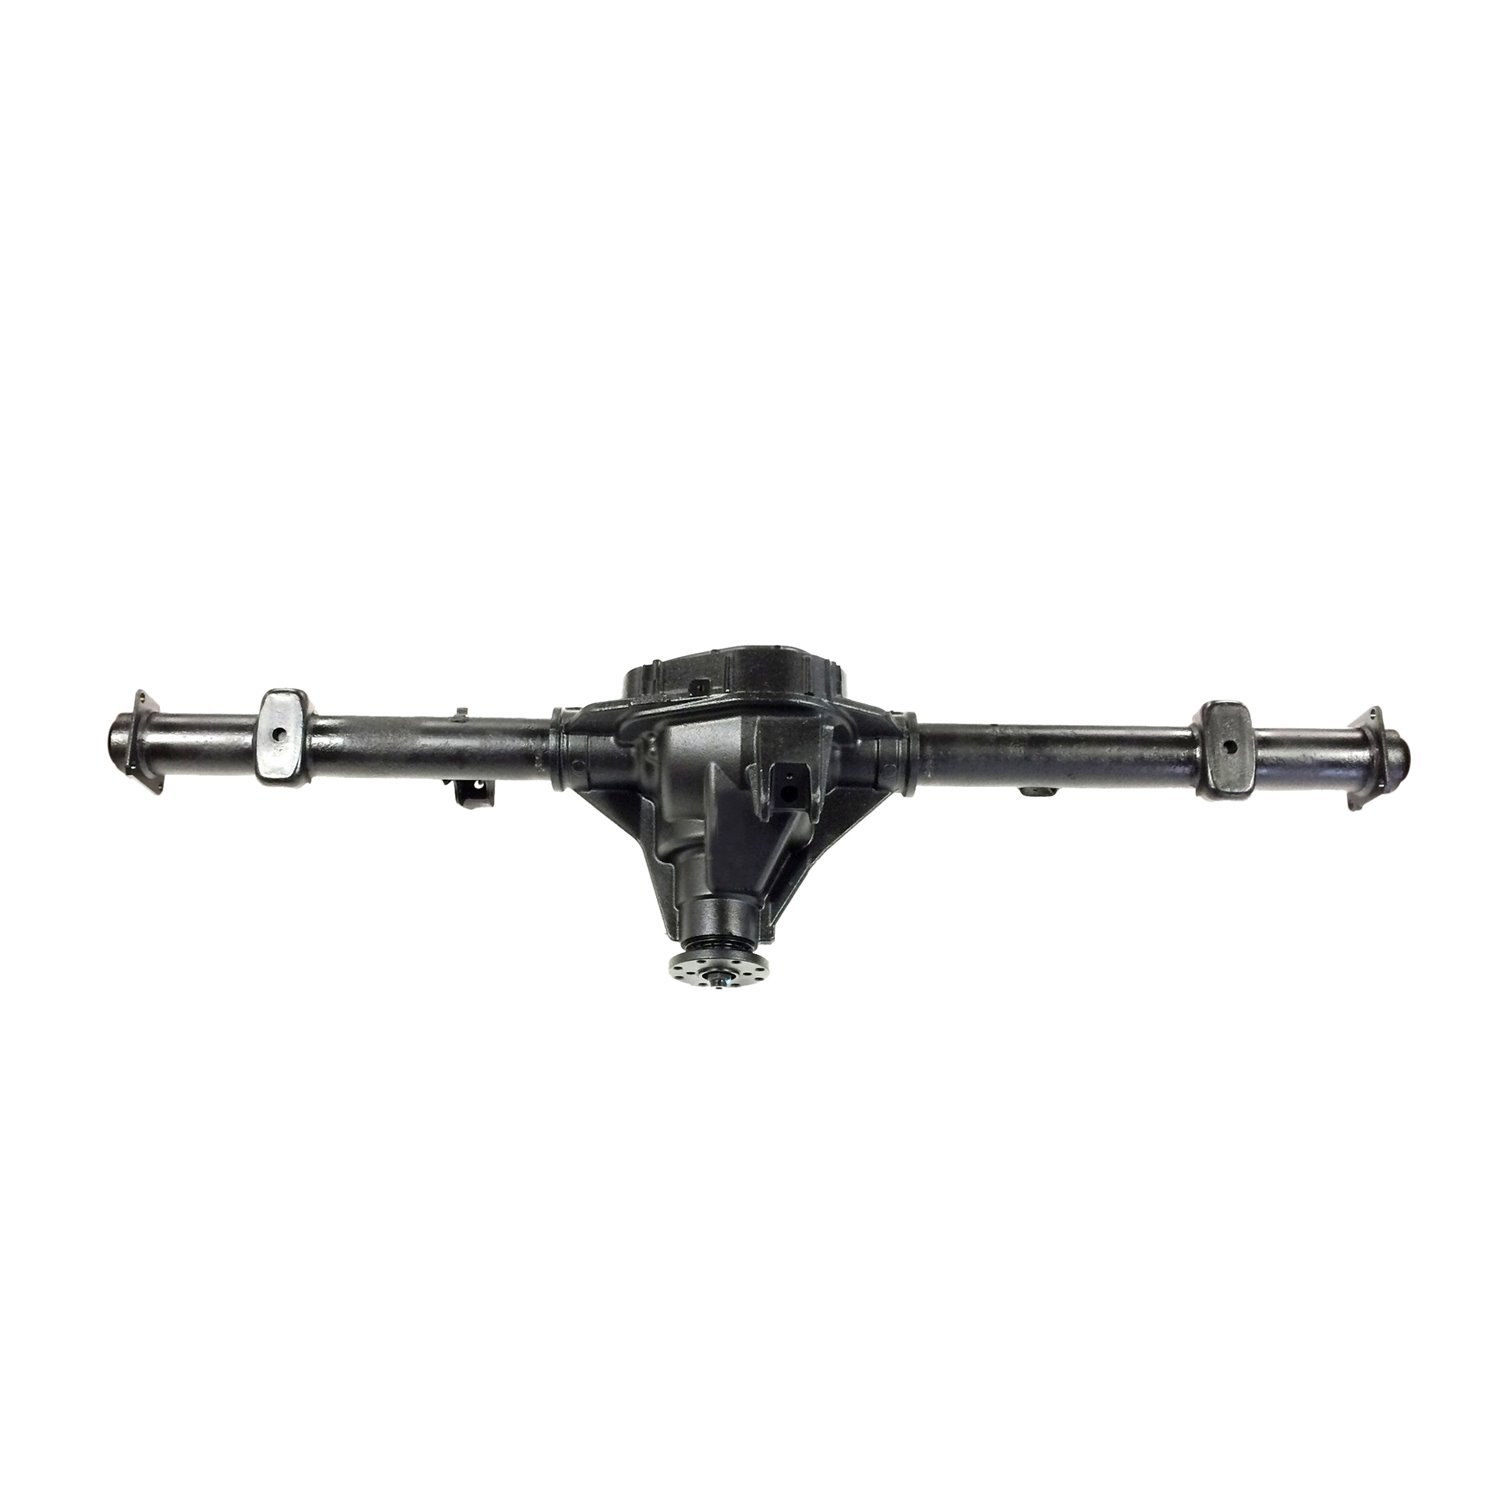 Remanufactured Complete Axle Assembly for Ford 9.75" 12-13 Ford F150 3.55 Ratio, 6 Lug